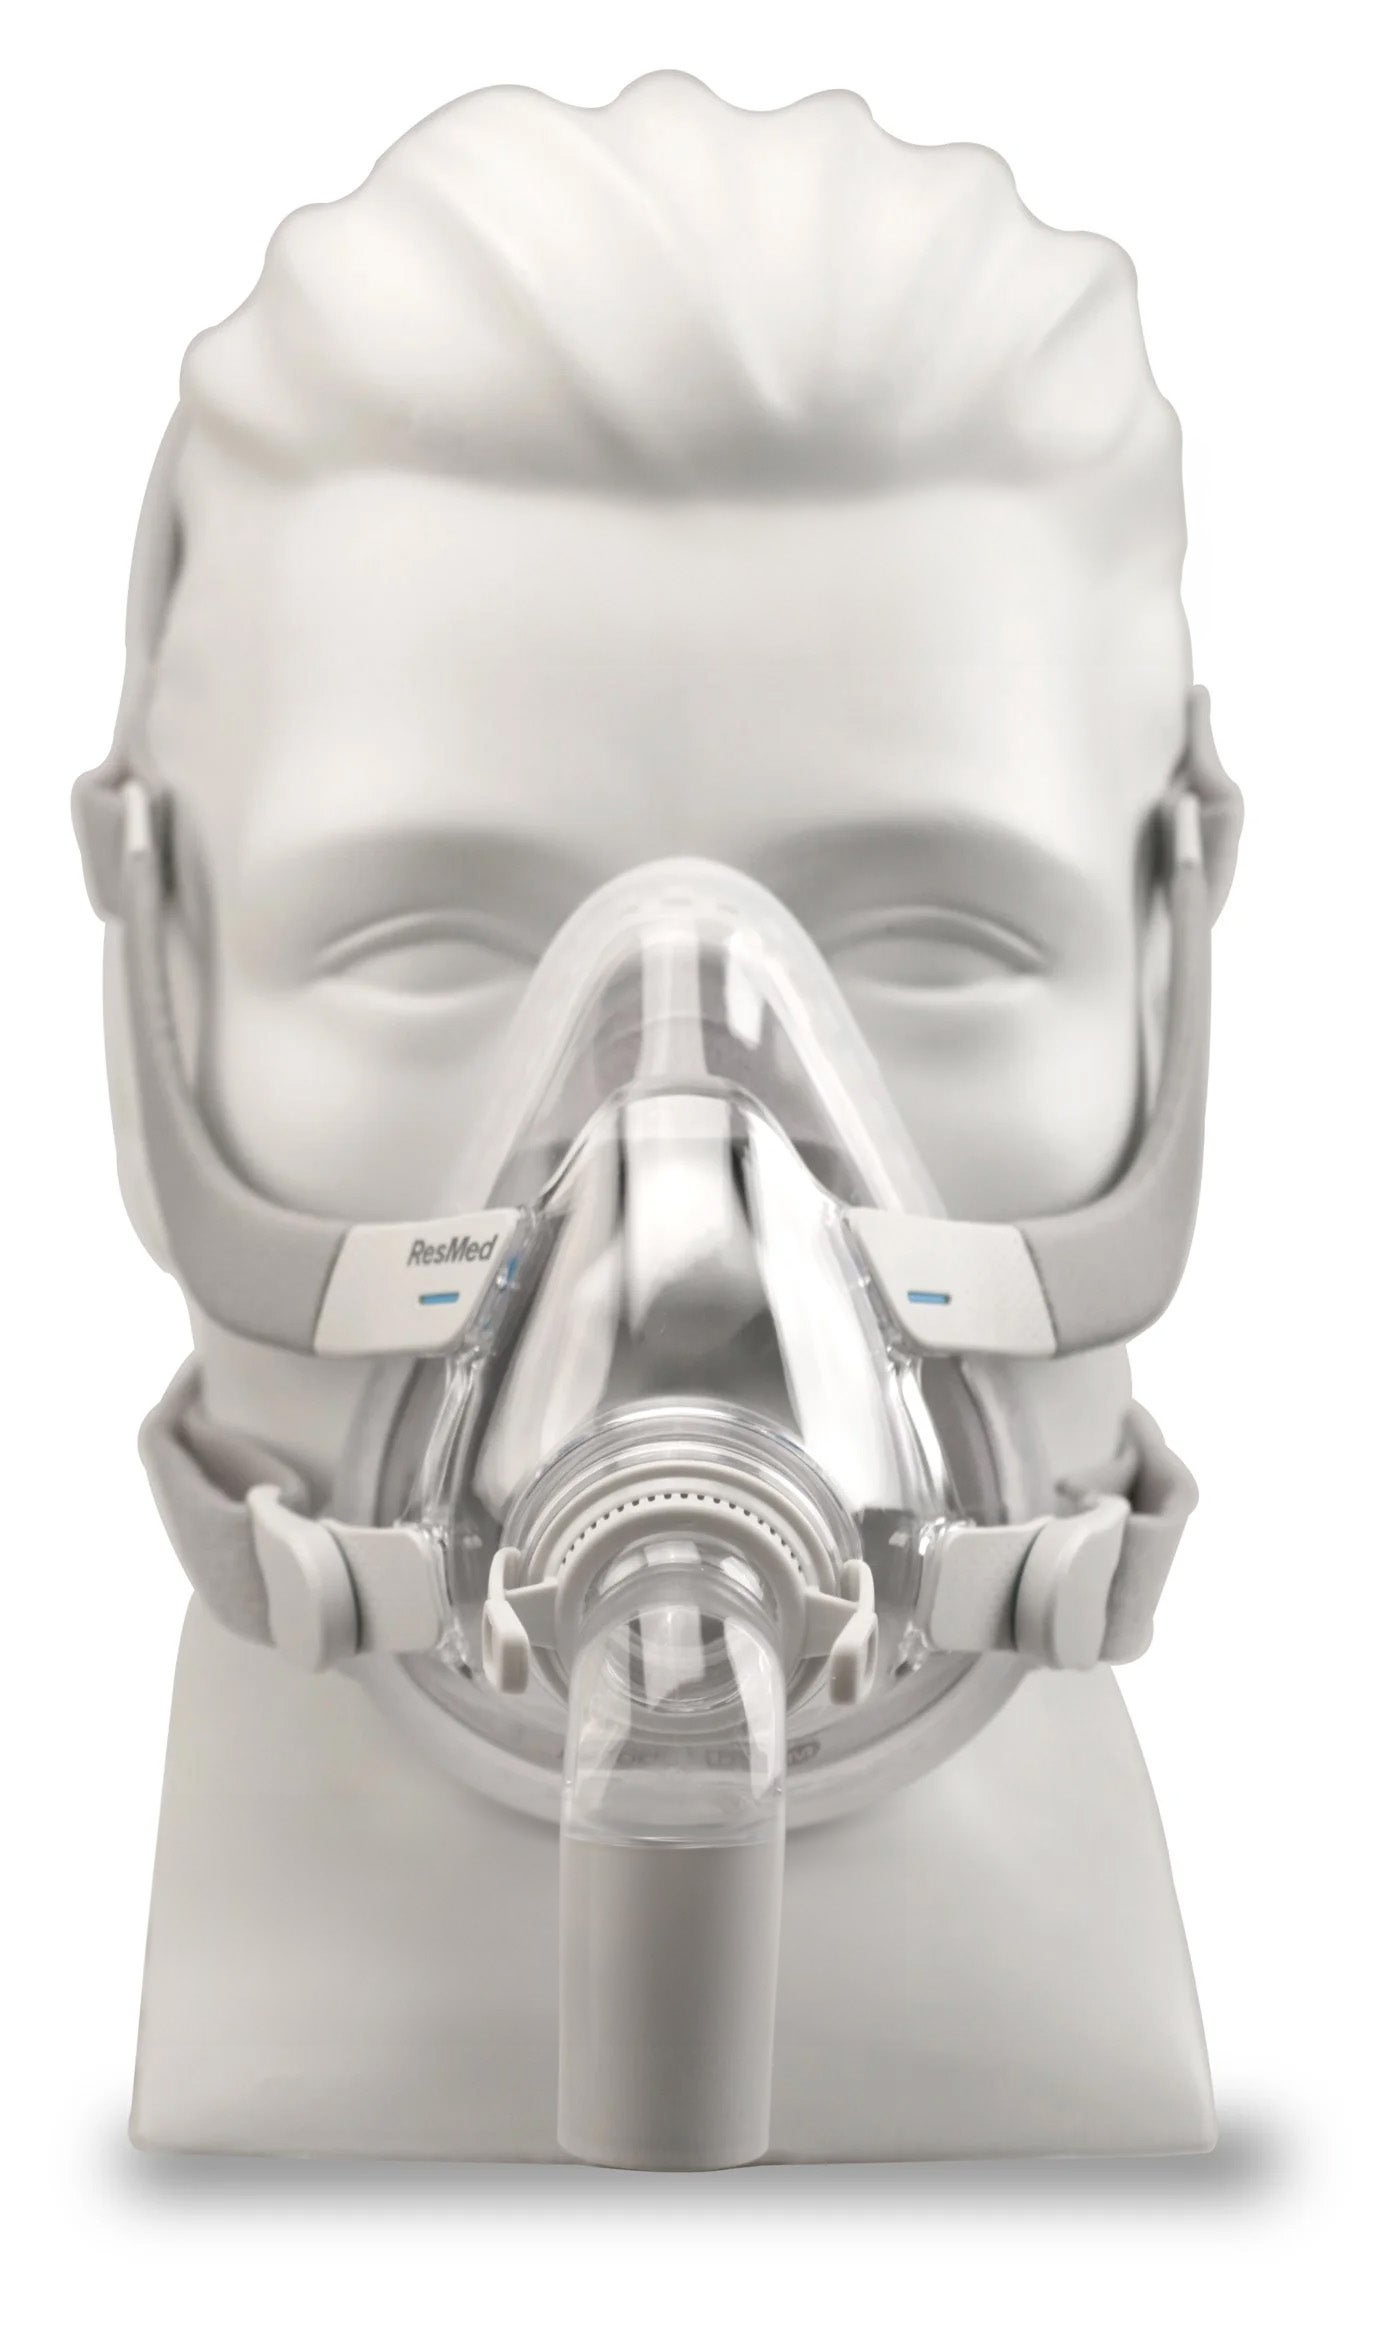 Resmed Airtouch F20™ Full Face Cpap Mask With Headgear 1861